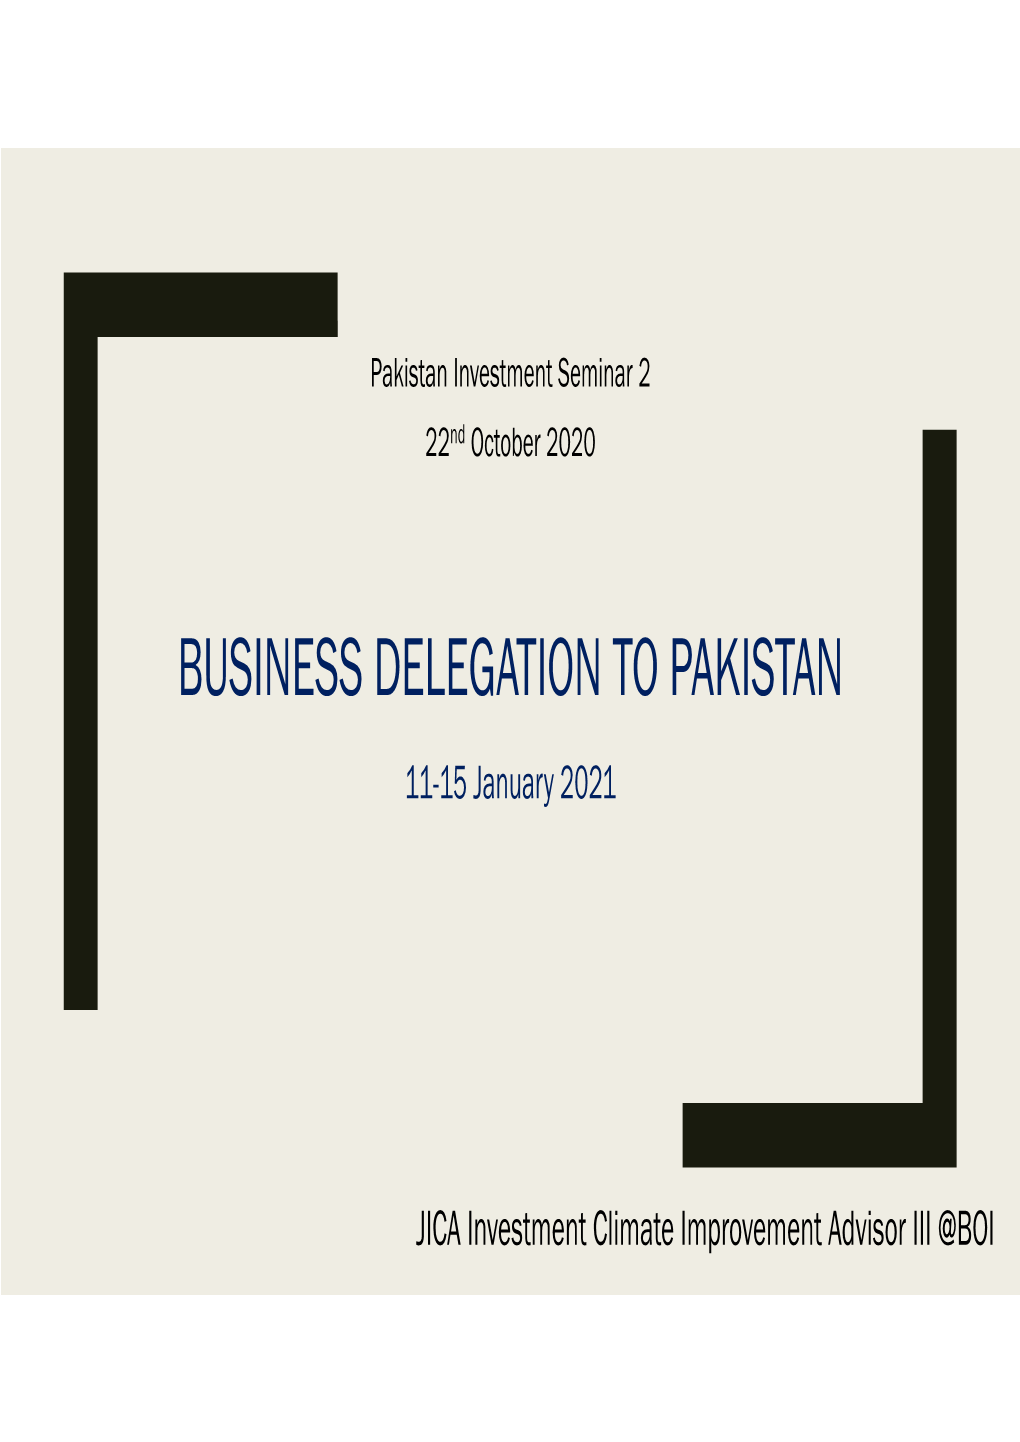 Introduction of Business Delegation to Pakistan